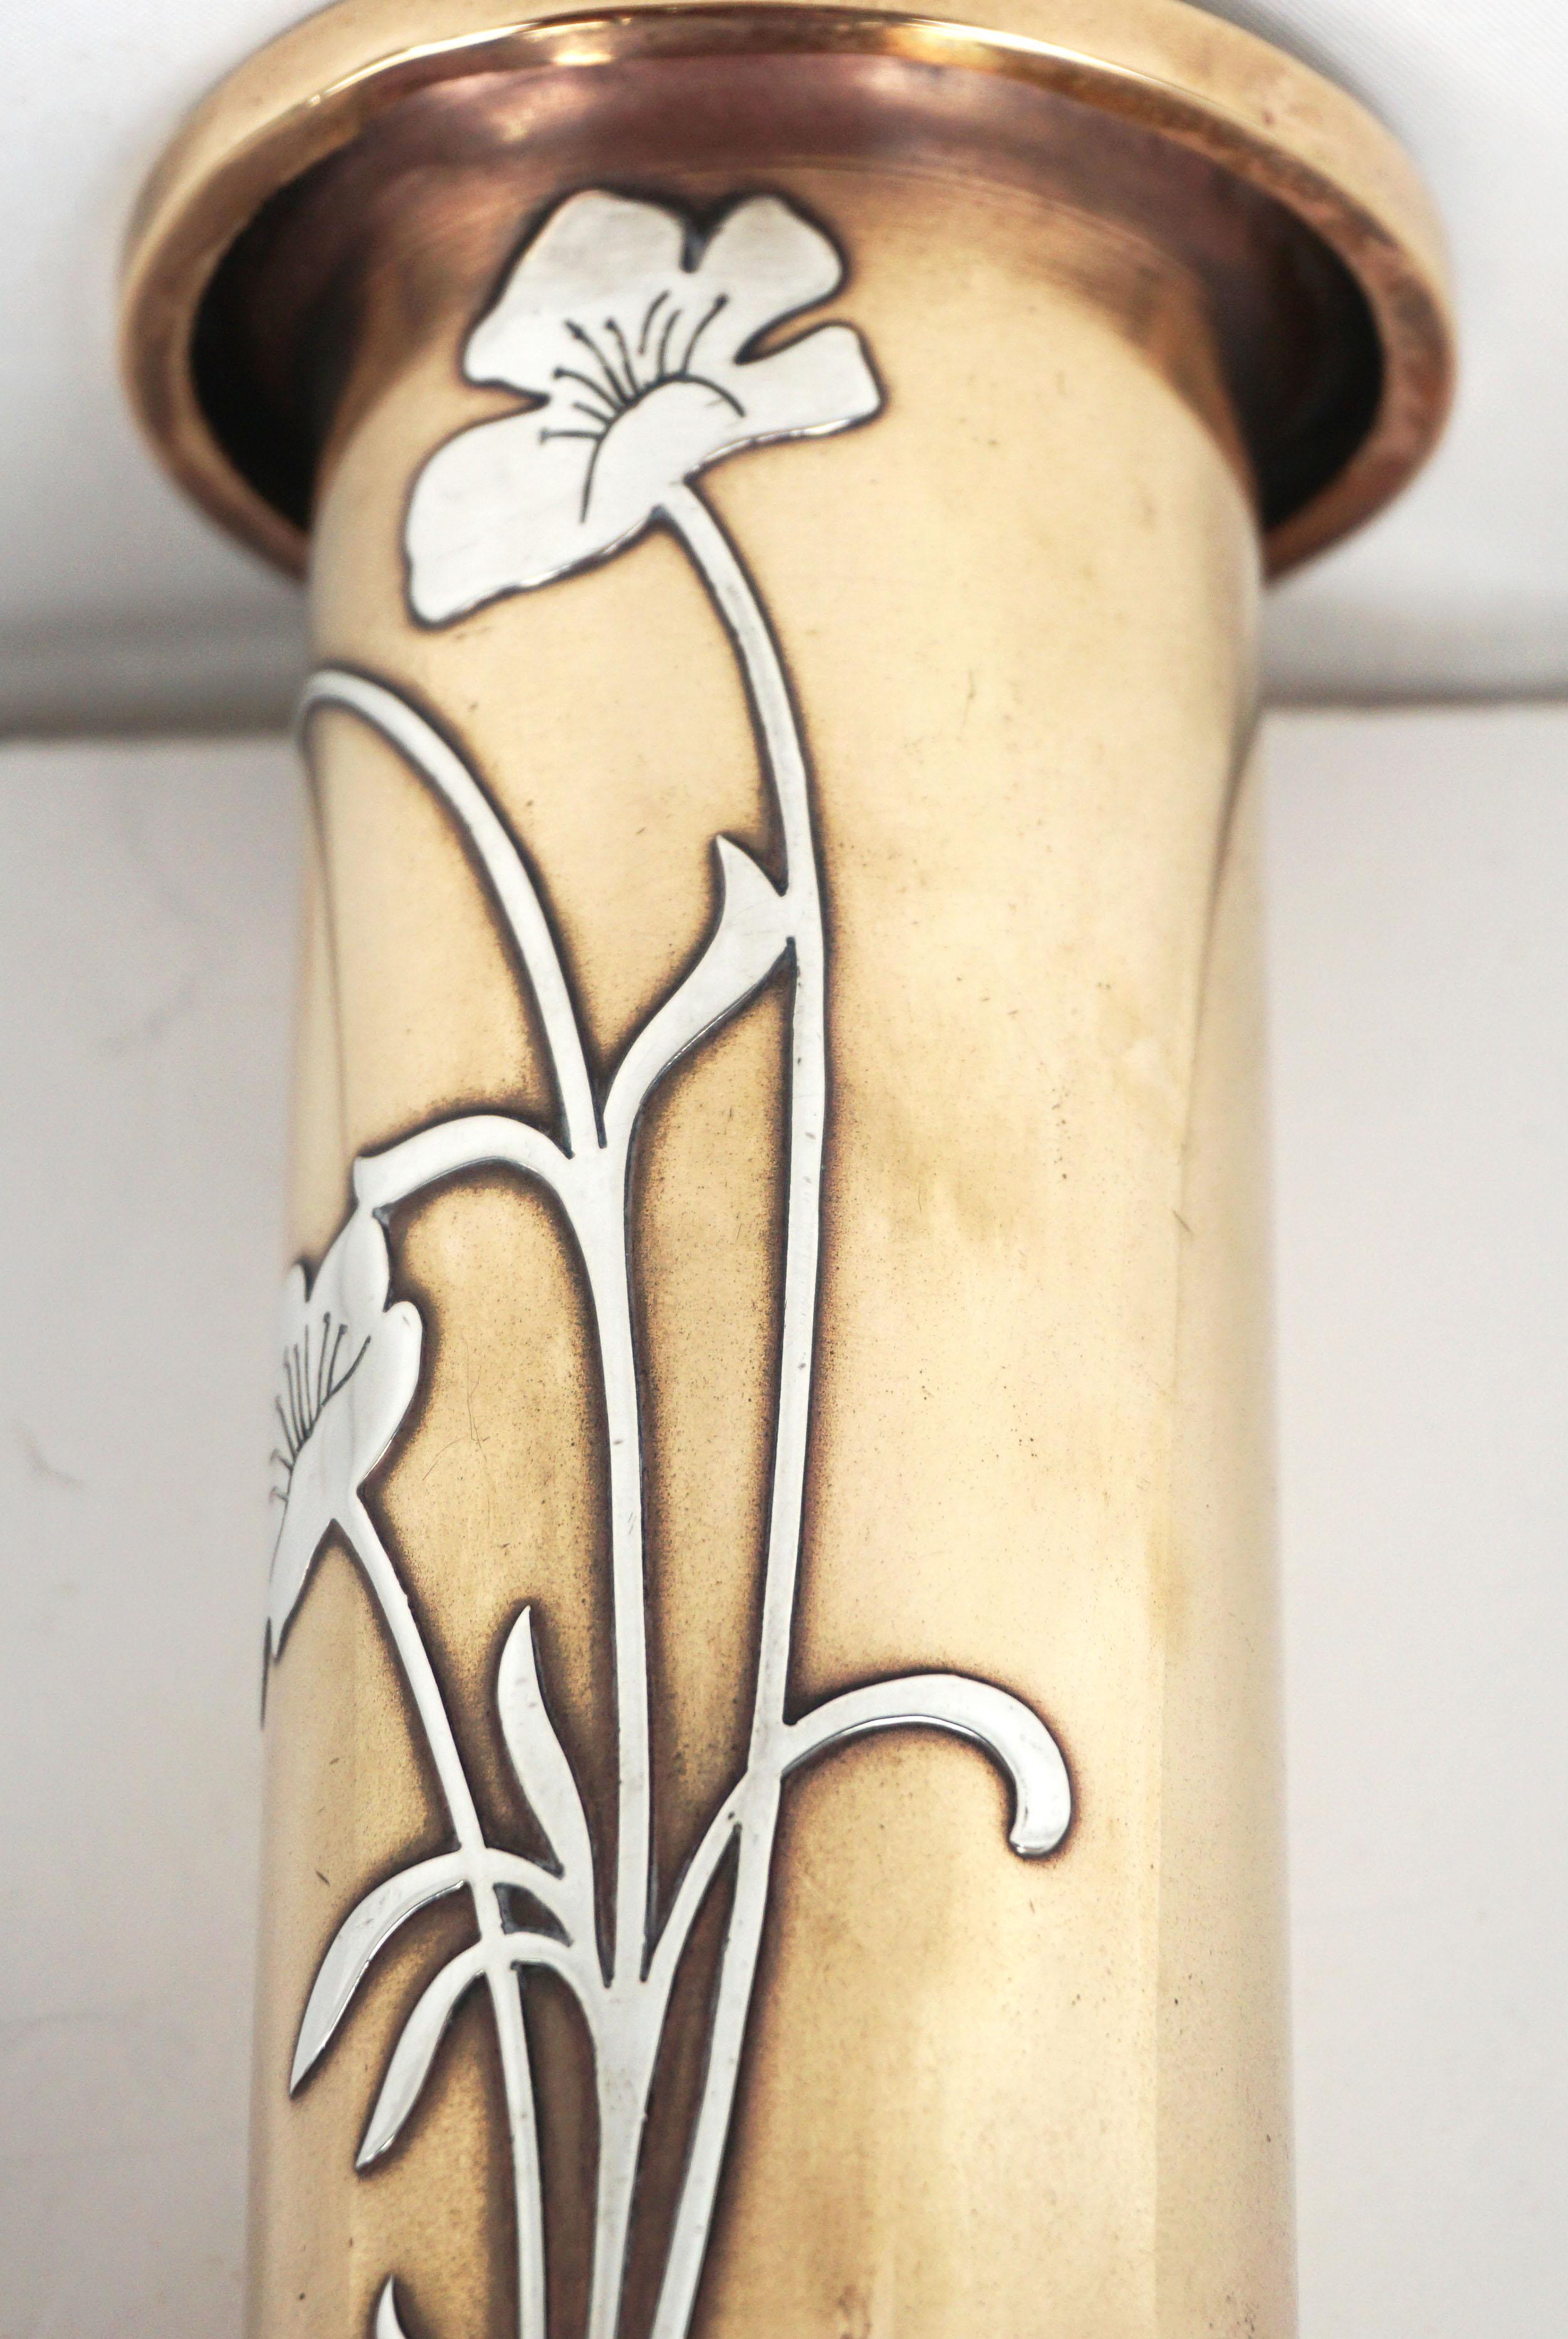 Early 20th Century California Poppy Art Nouveau Sterling Overlay on Bronze Vase 1